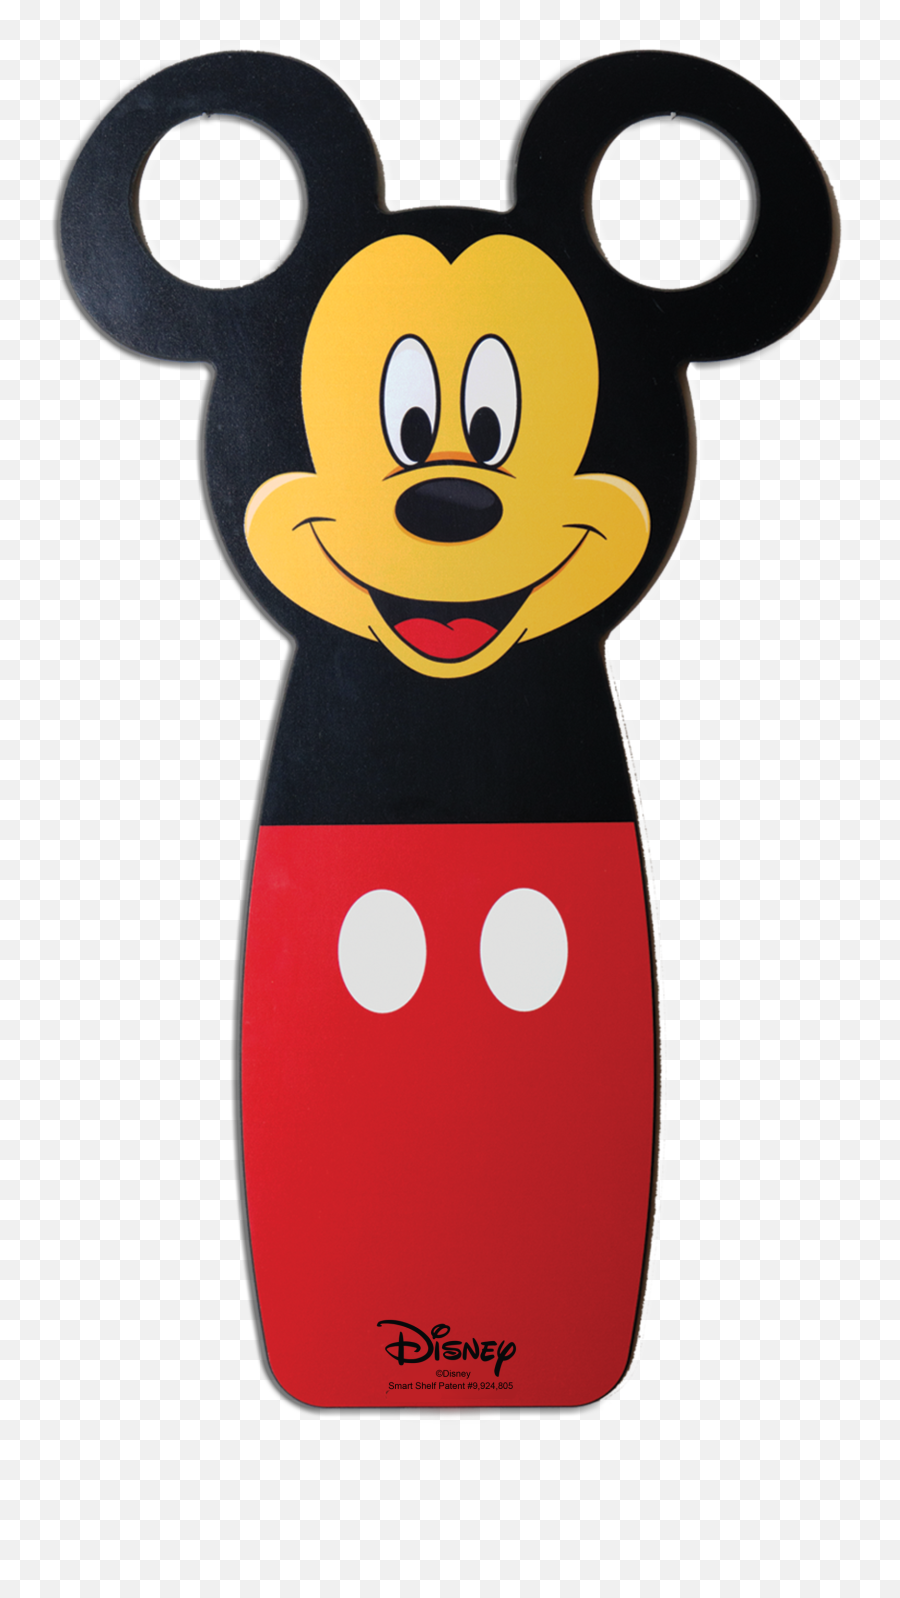 Mickey Mouse Symbol - Mickey Mouse Png Download Original Cartoon,Mickey Mouse Png